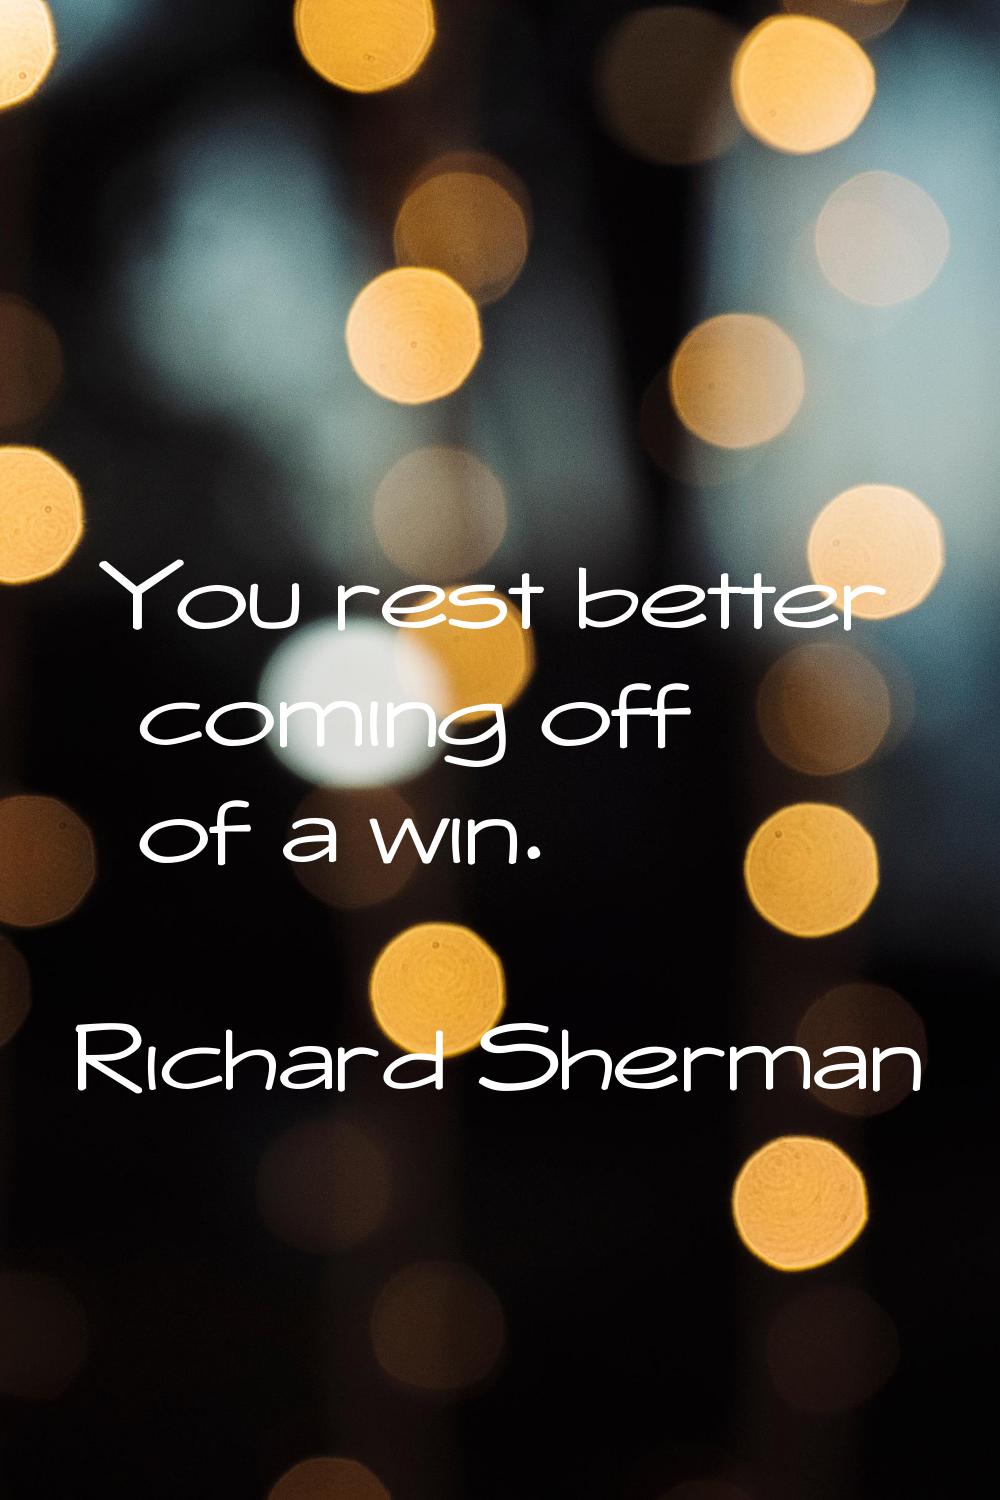 You rest better coming off of a win.